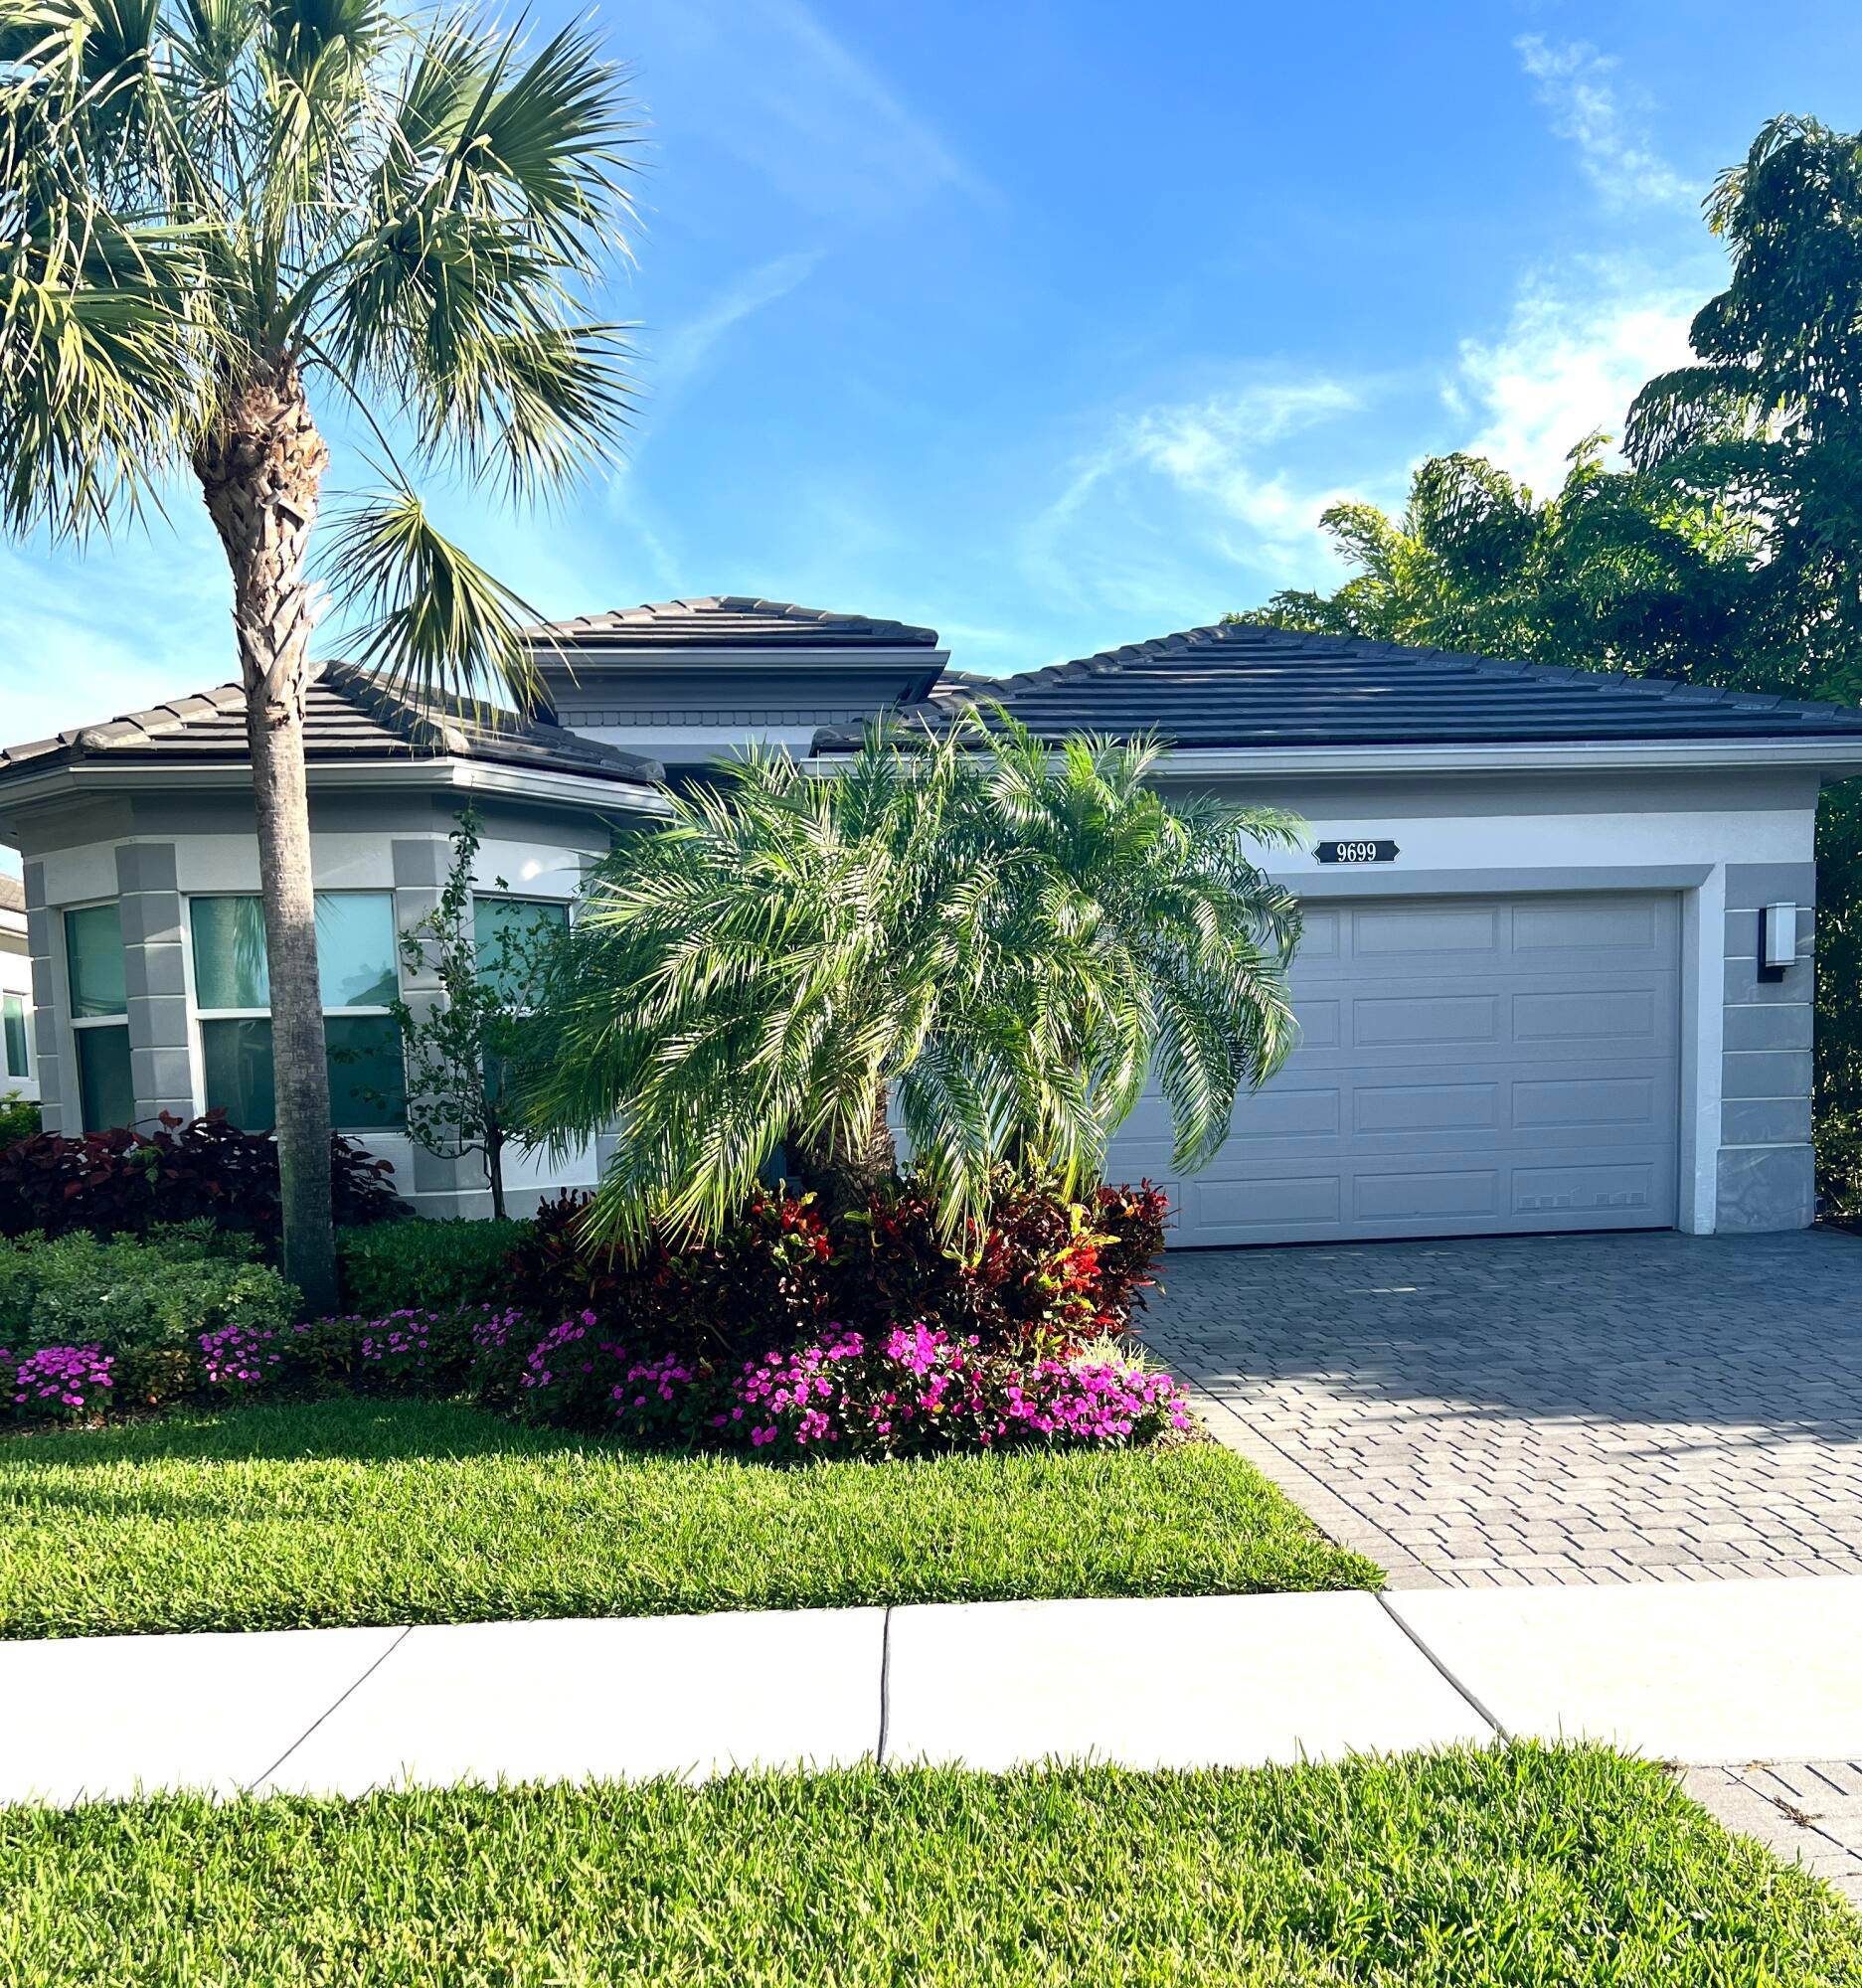 Welcome to the beautiful, desirable Dakota community in Delray Beach, where you will find this exquisite model offering 3 bedrooms and 2.